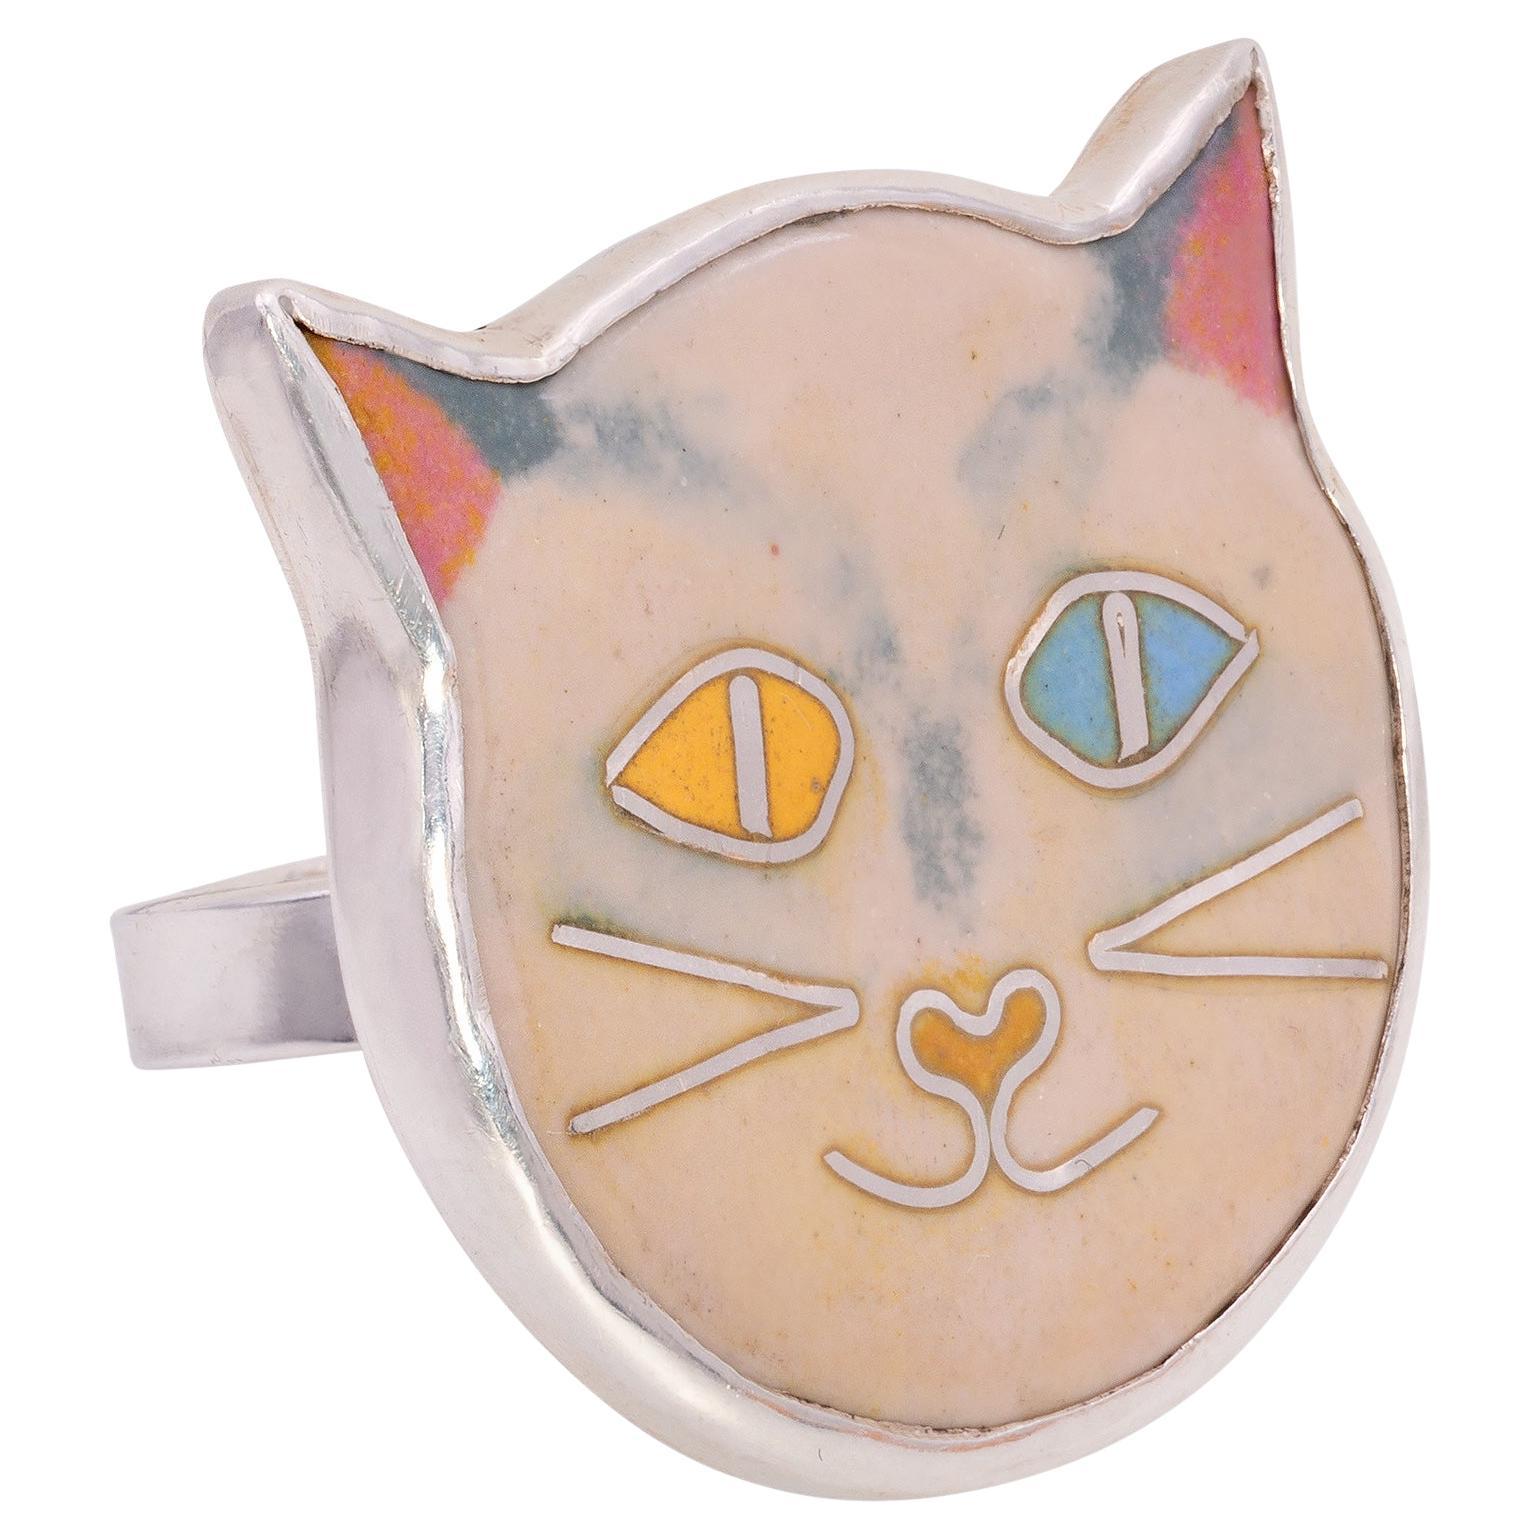 For Sale:  April in Paris Designs "Kitty Kat Ring" Enamel Hand Painted Ring